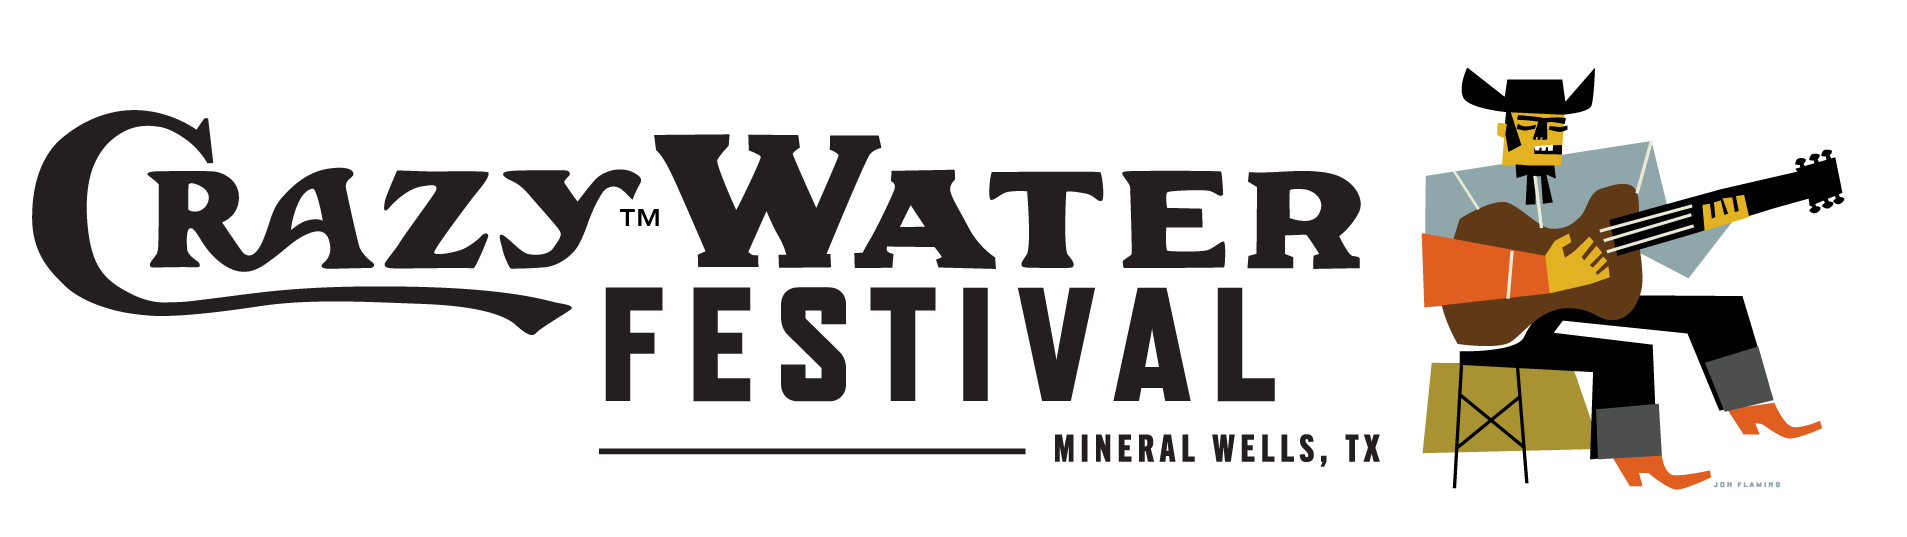 Crazy Water Festival graphic